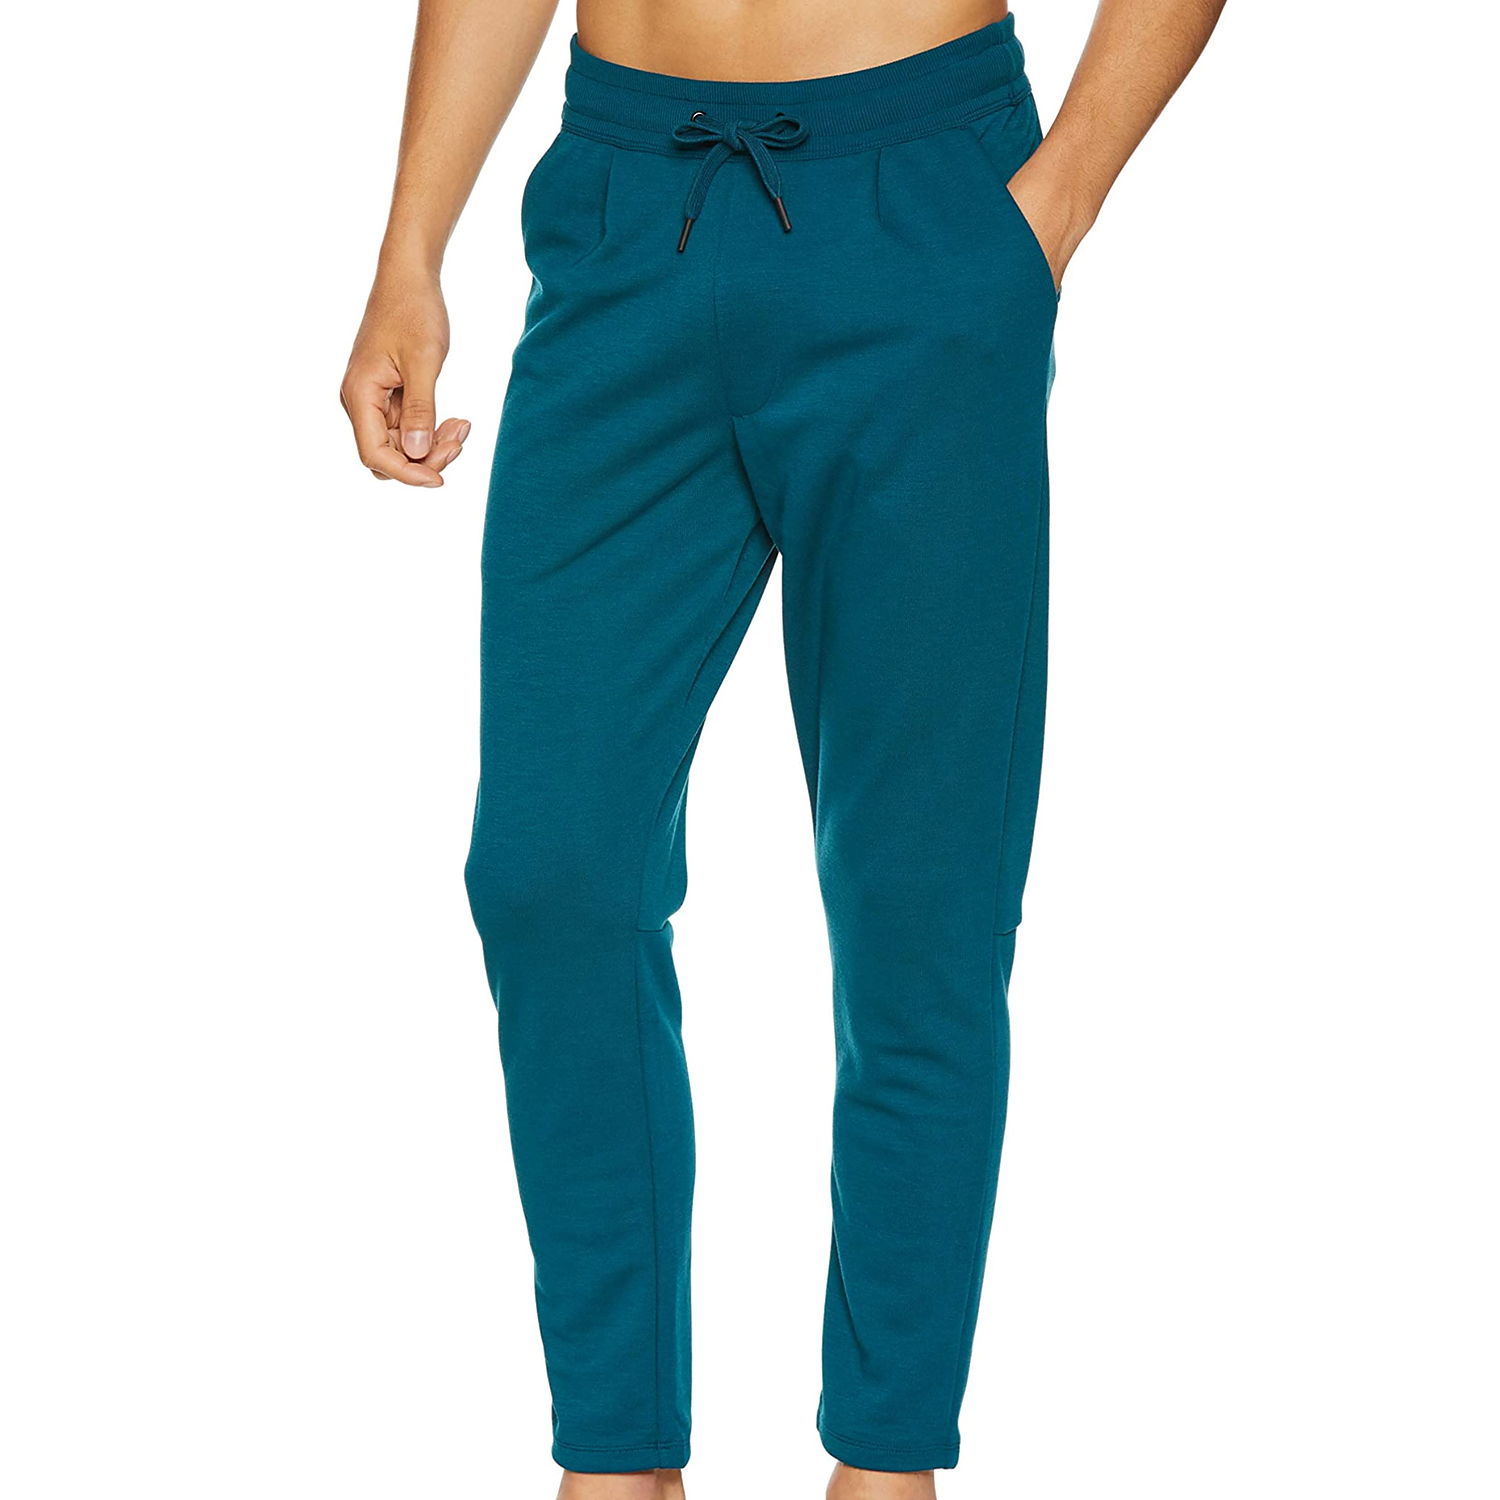 Under Armour Mens Techno Teal UA Athlete CELLIANT Recovery Sweatpants $120